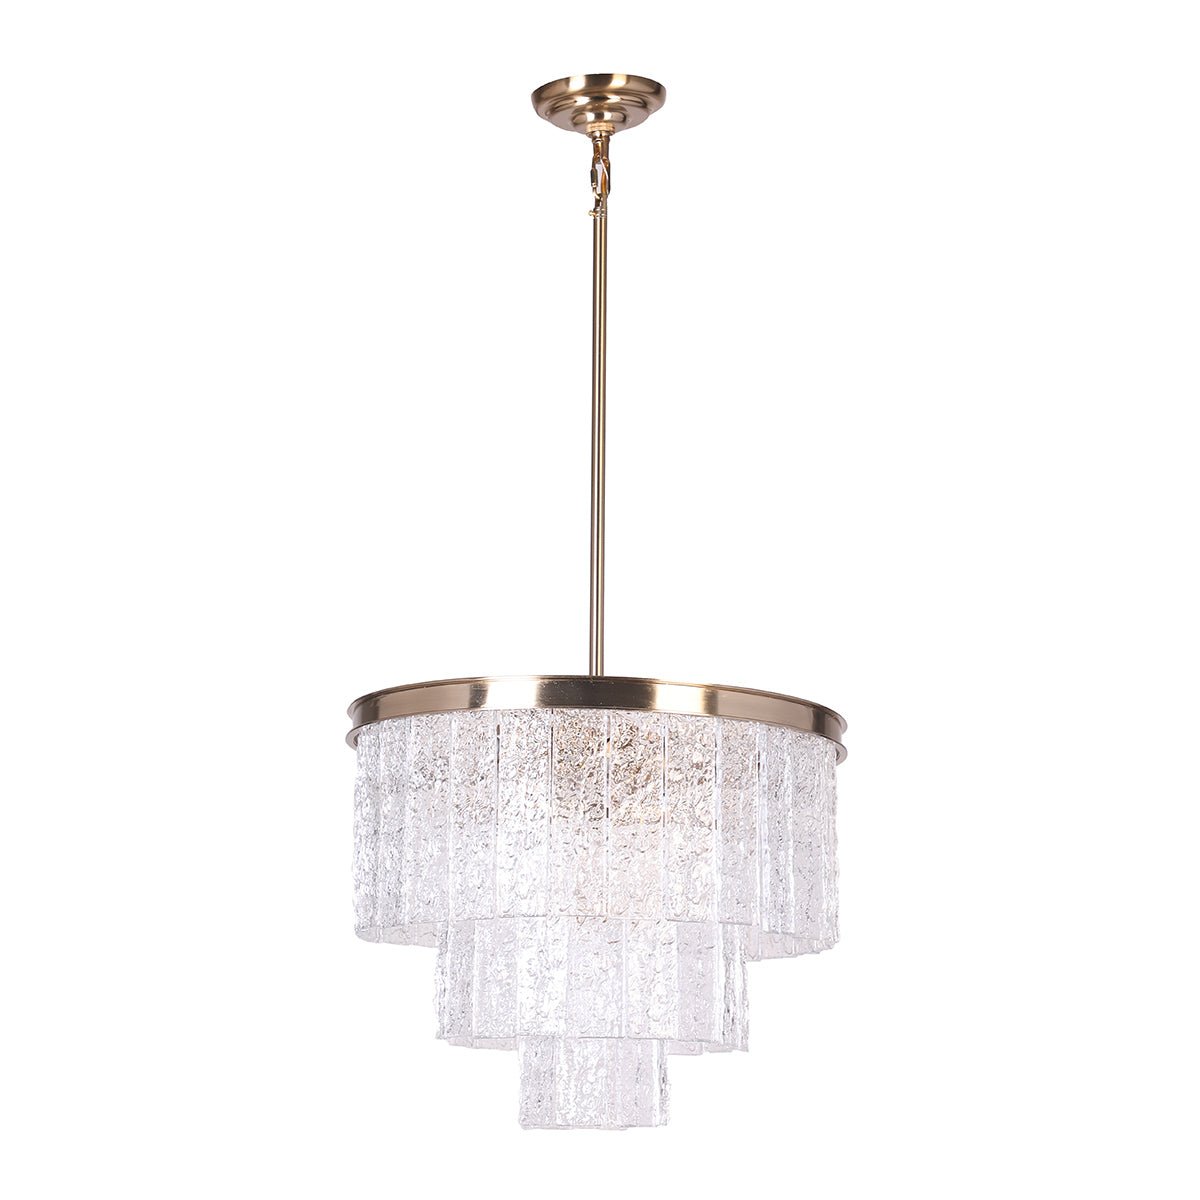 Oliver Round Tiered Glass Tile Chandelier Collection - Italian Concept - 